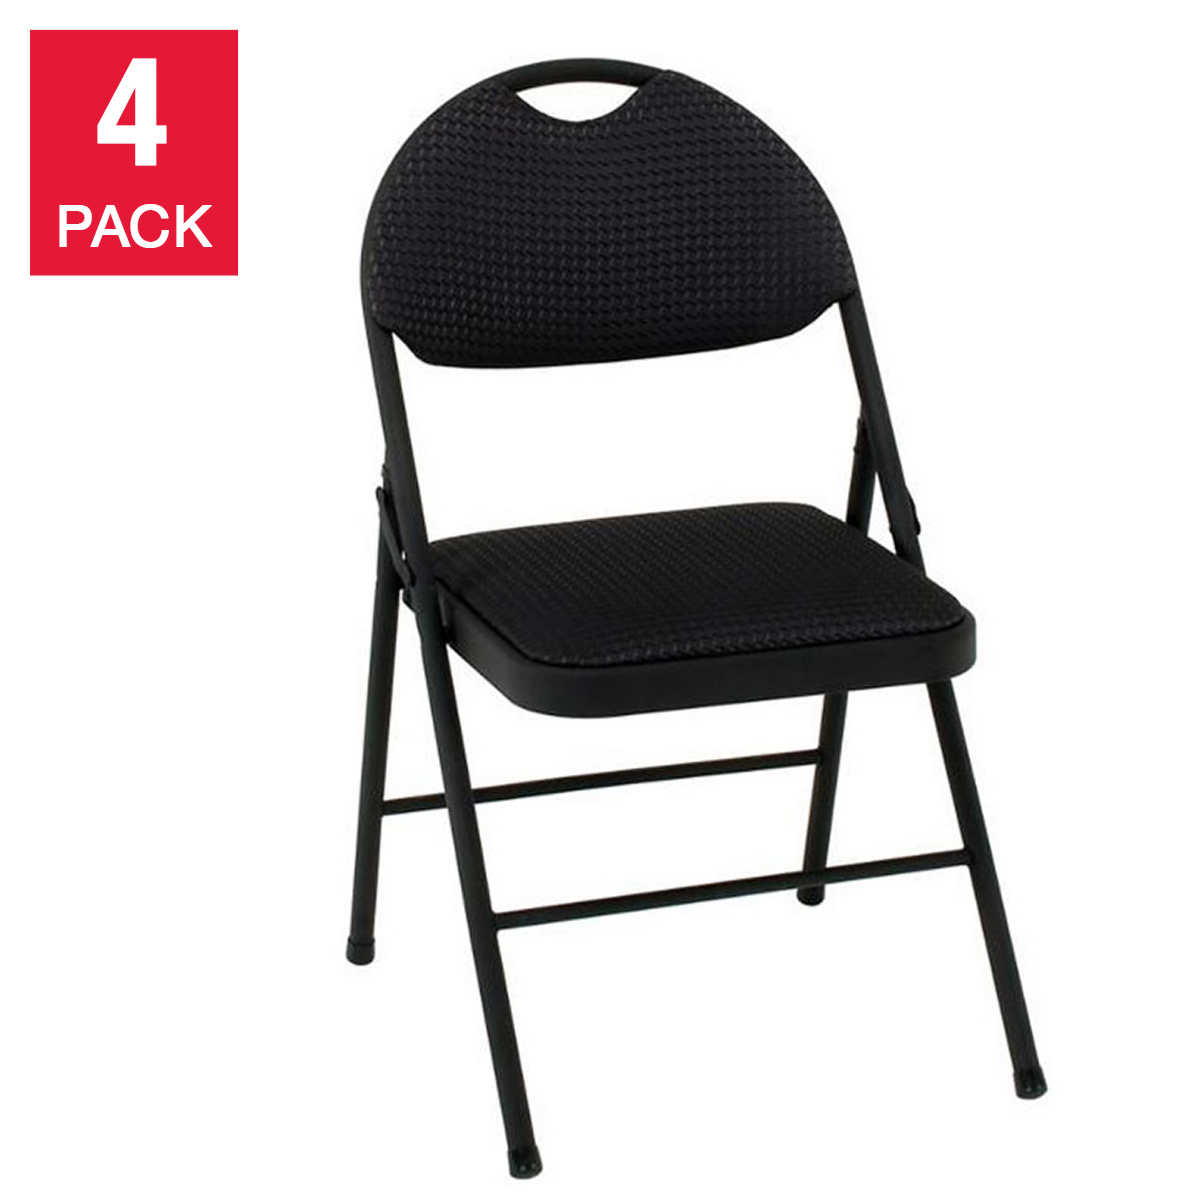 Cosco Commercial Upholstered Folding Chair 4 Pack Costco